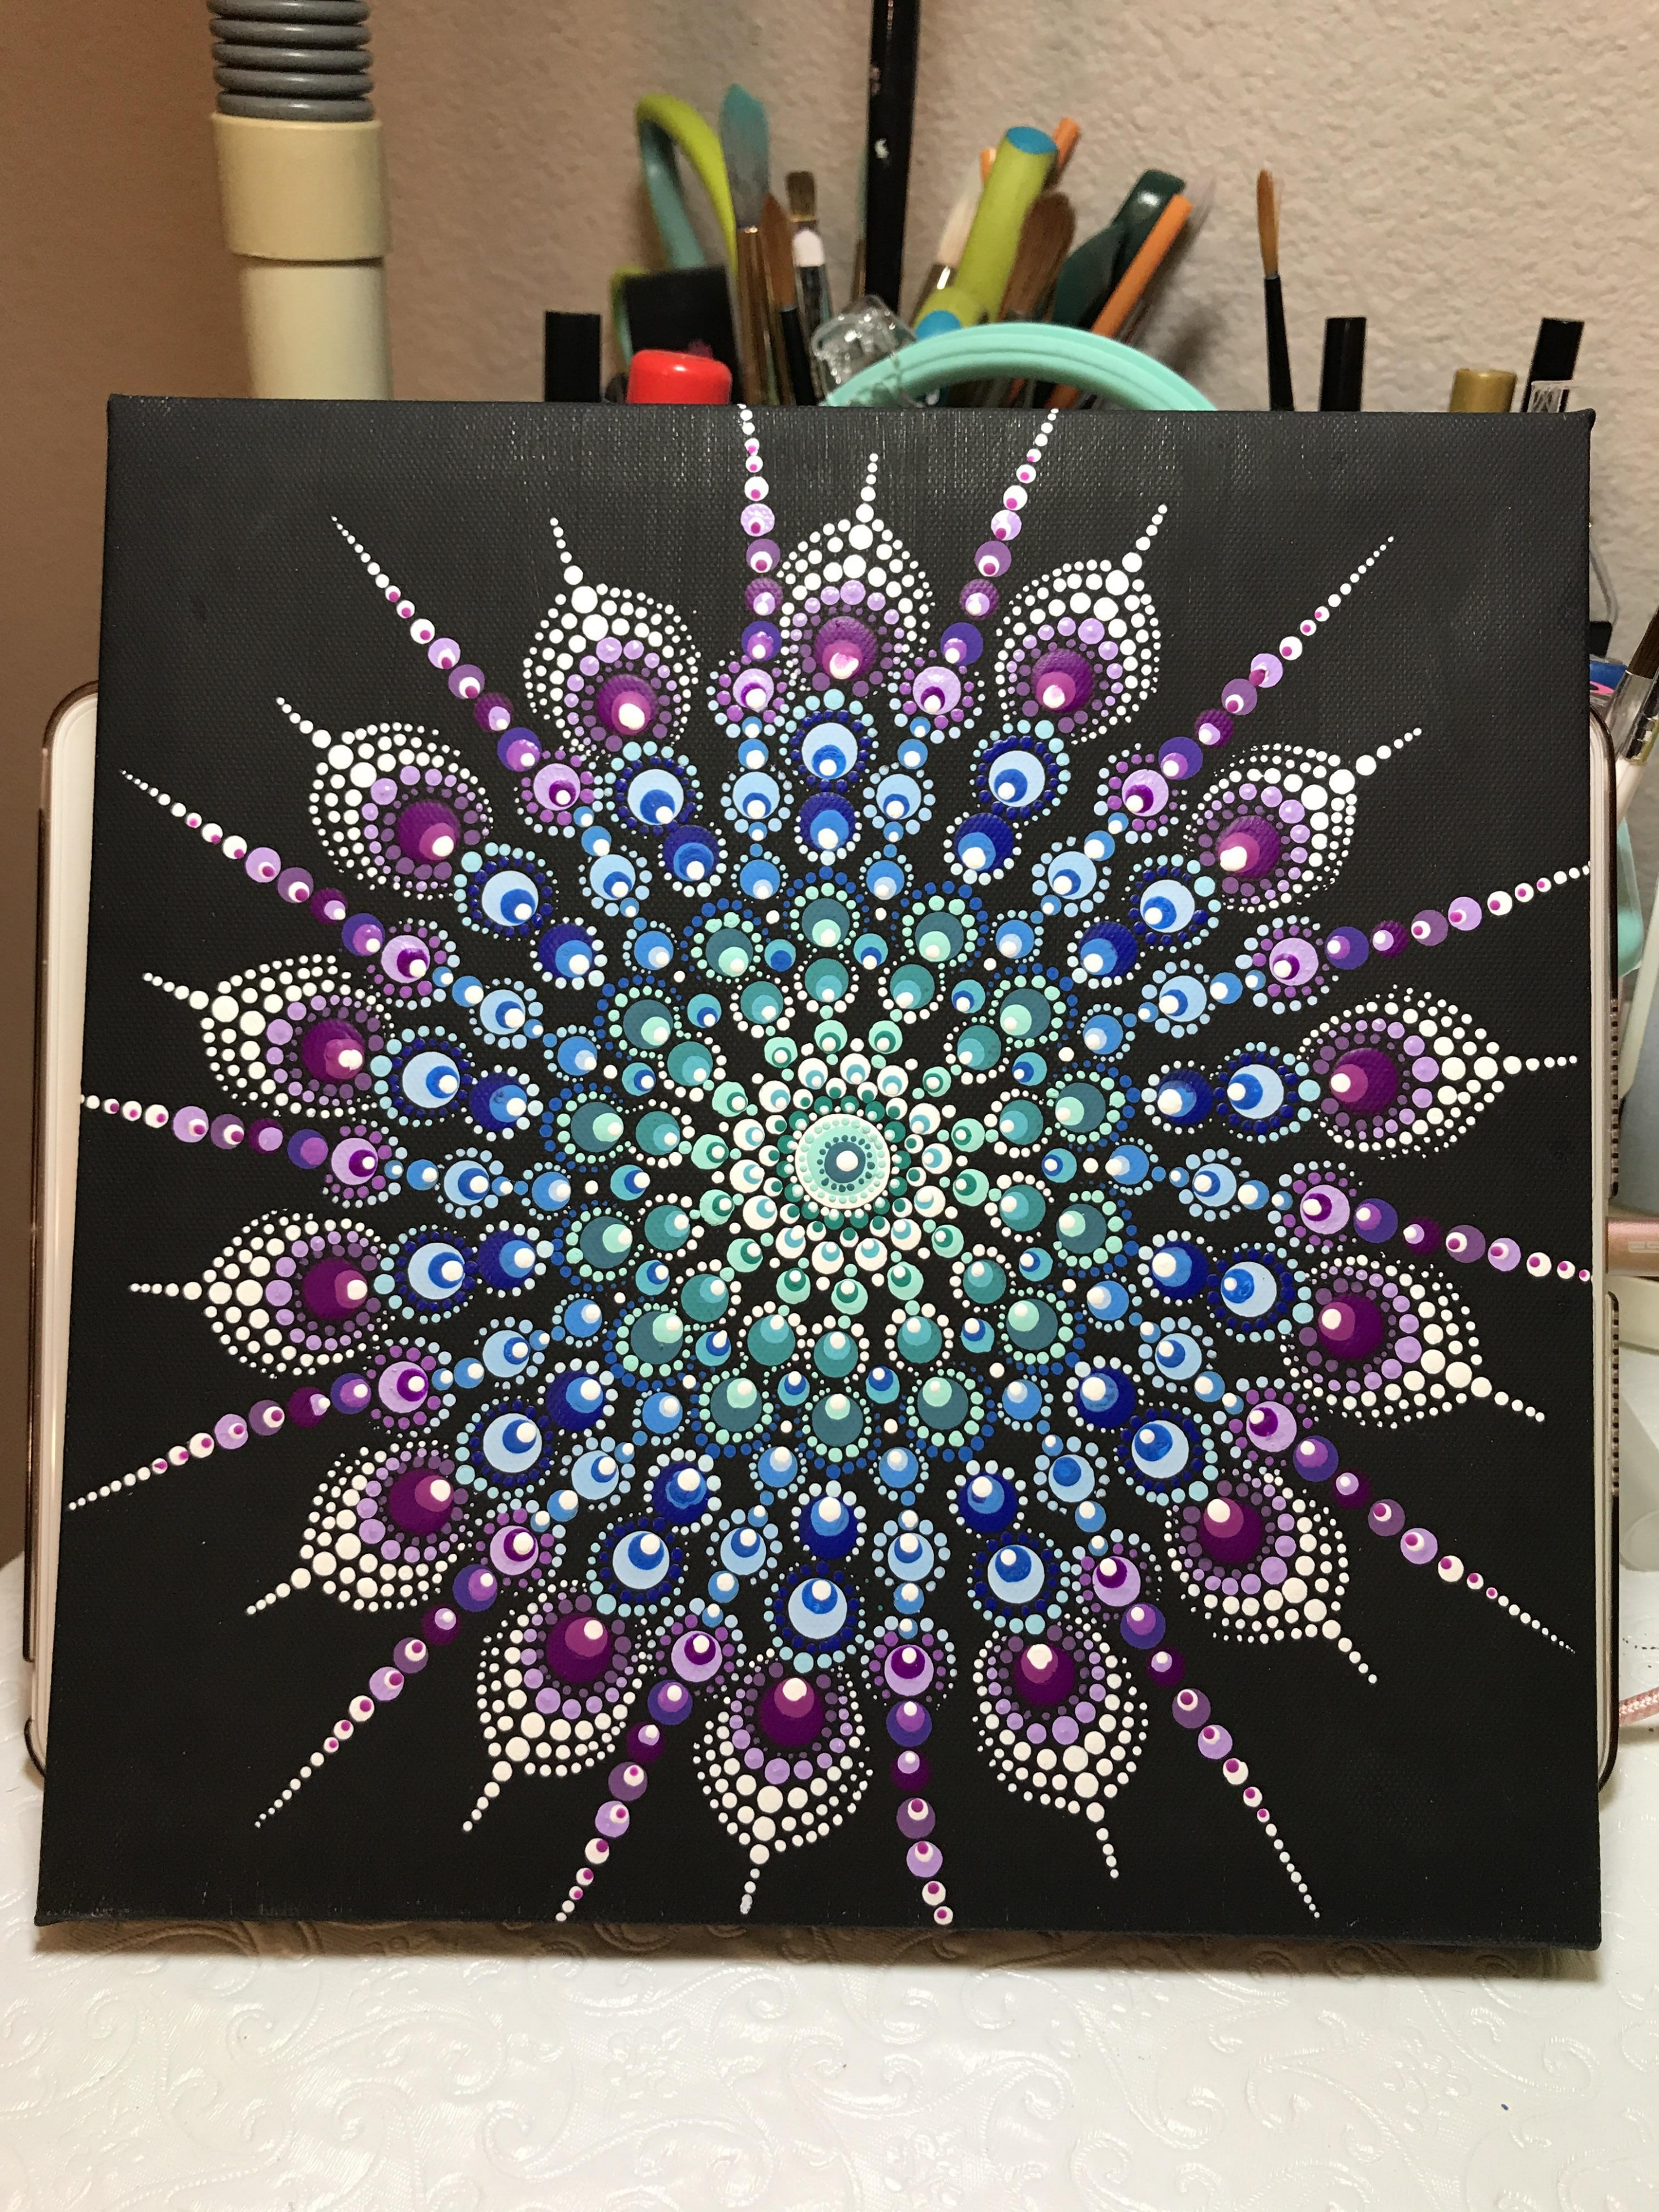 A Birthday Mandala For A Friend. I Buy Cheap Canvases From The ..